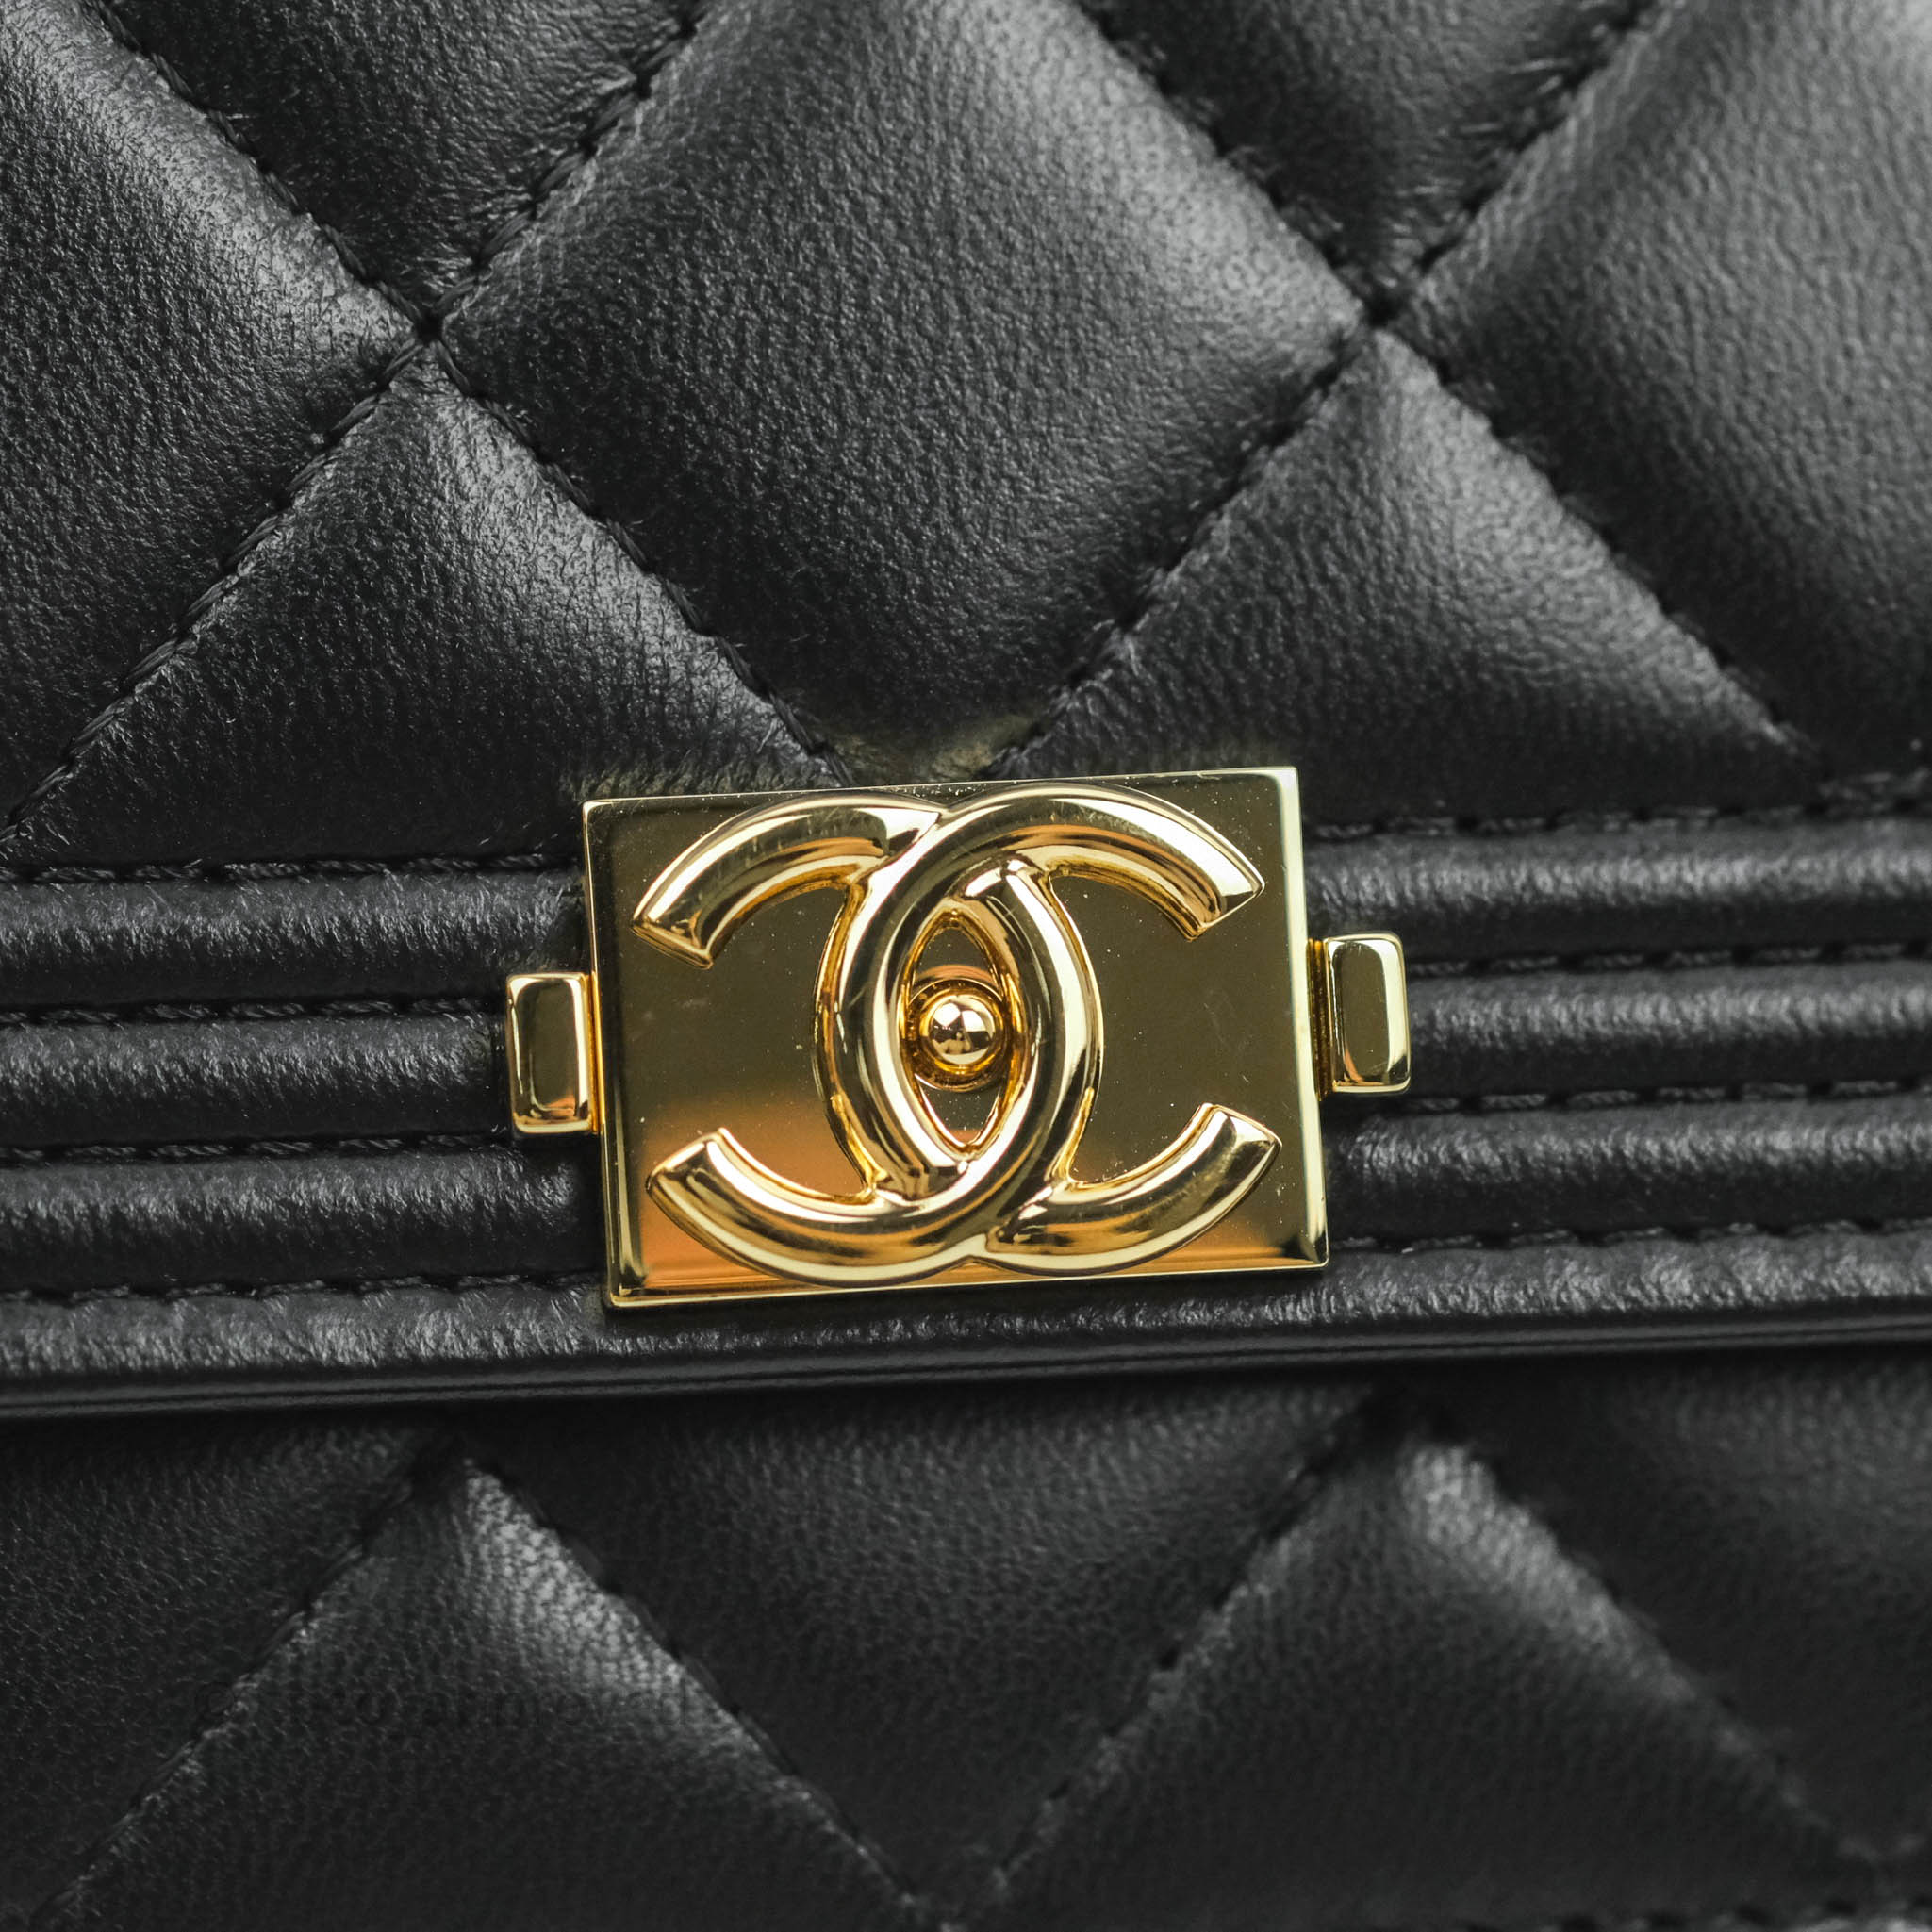 Five Reasons Why You Should Buy Yourself The Chanel Boy Bag Review   Fashion For Lunch